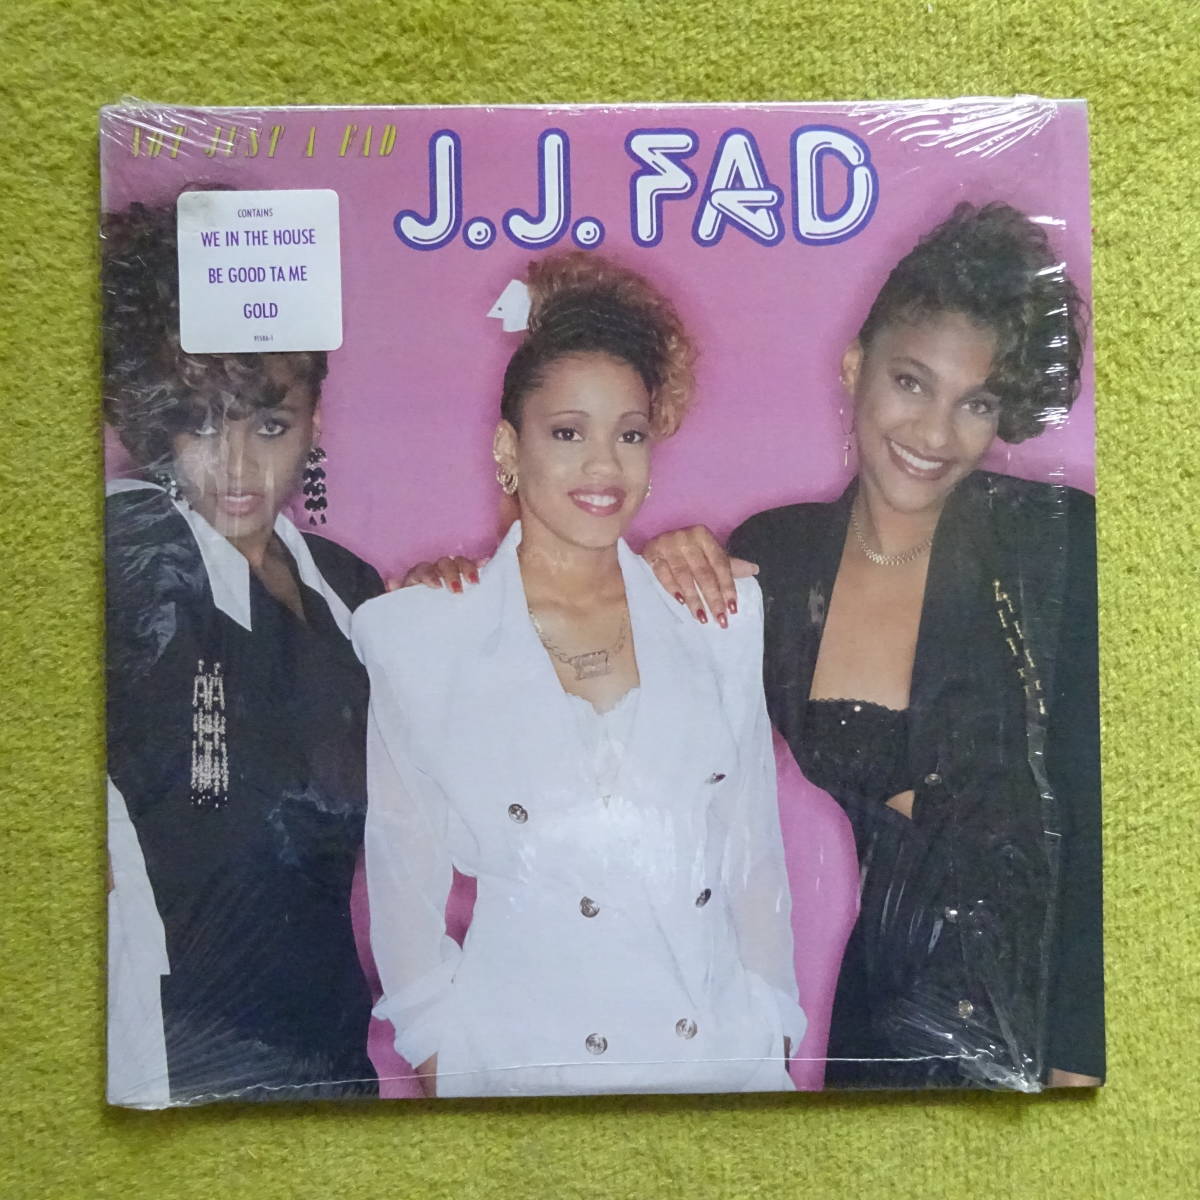 J.J. Fad Not Just A Fad* Ruthless Records 盤 We In The House Gold Be Good Ta Me_画像1